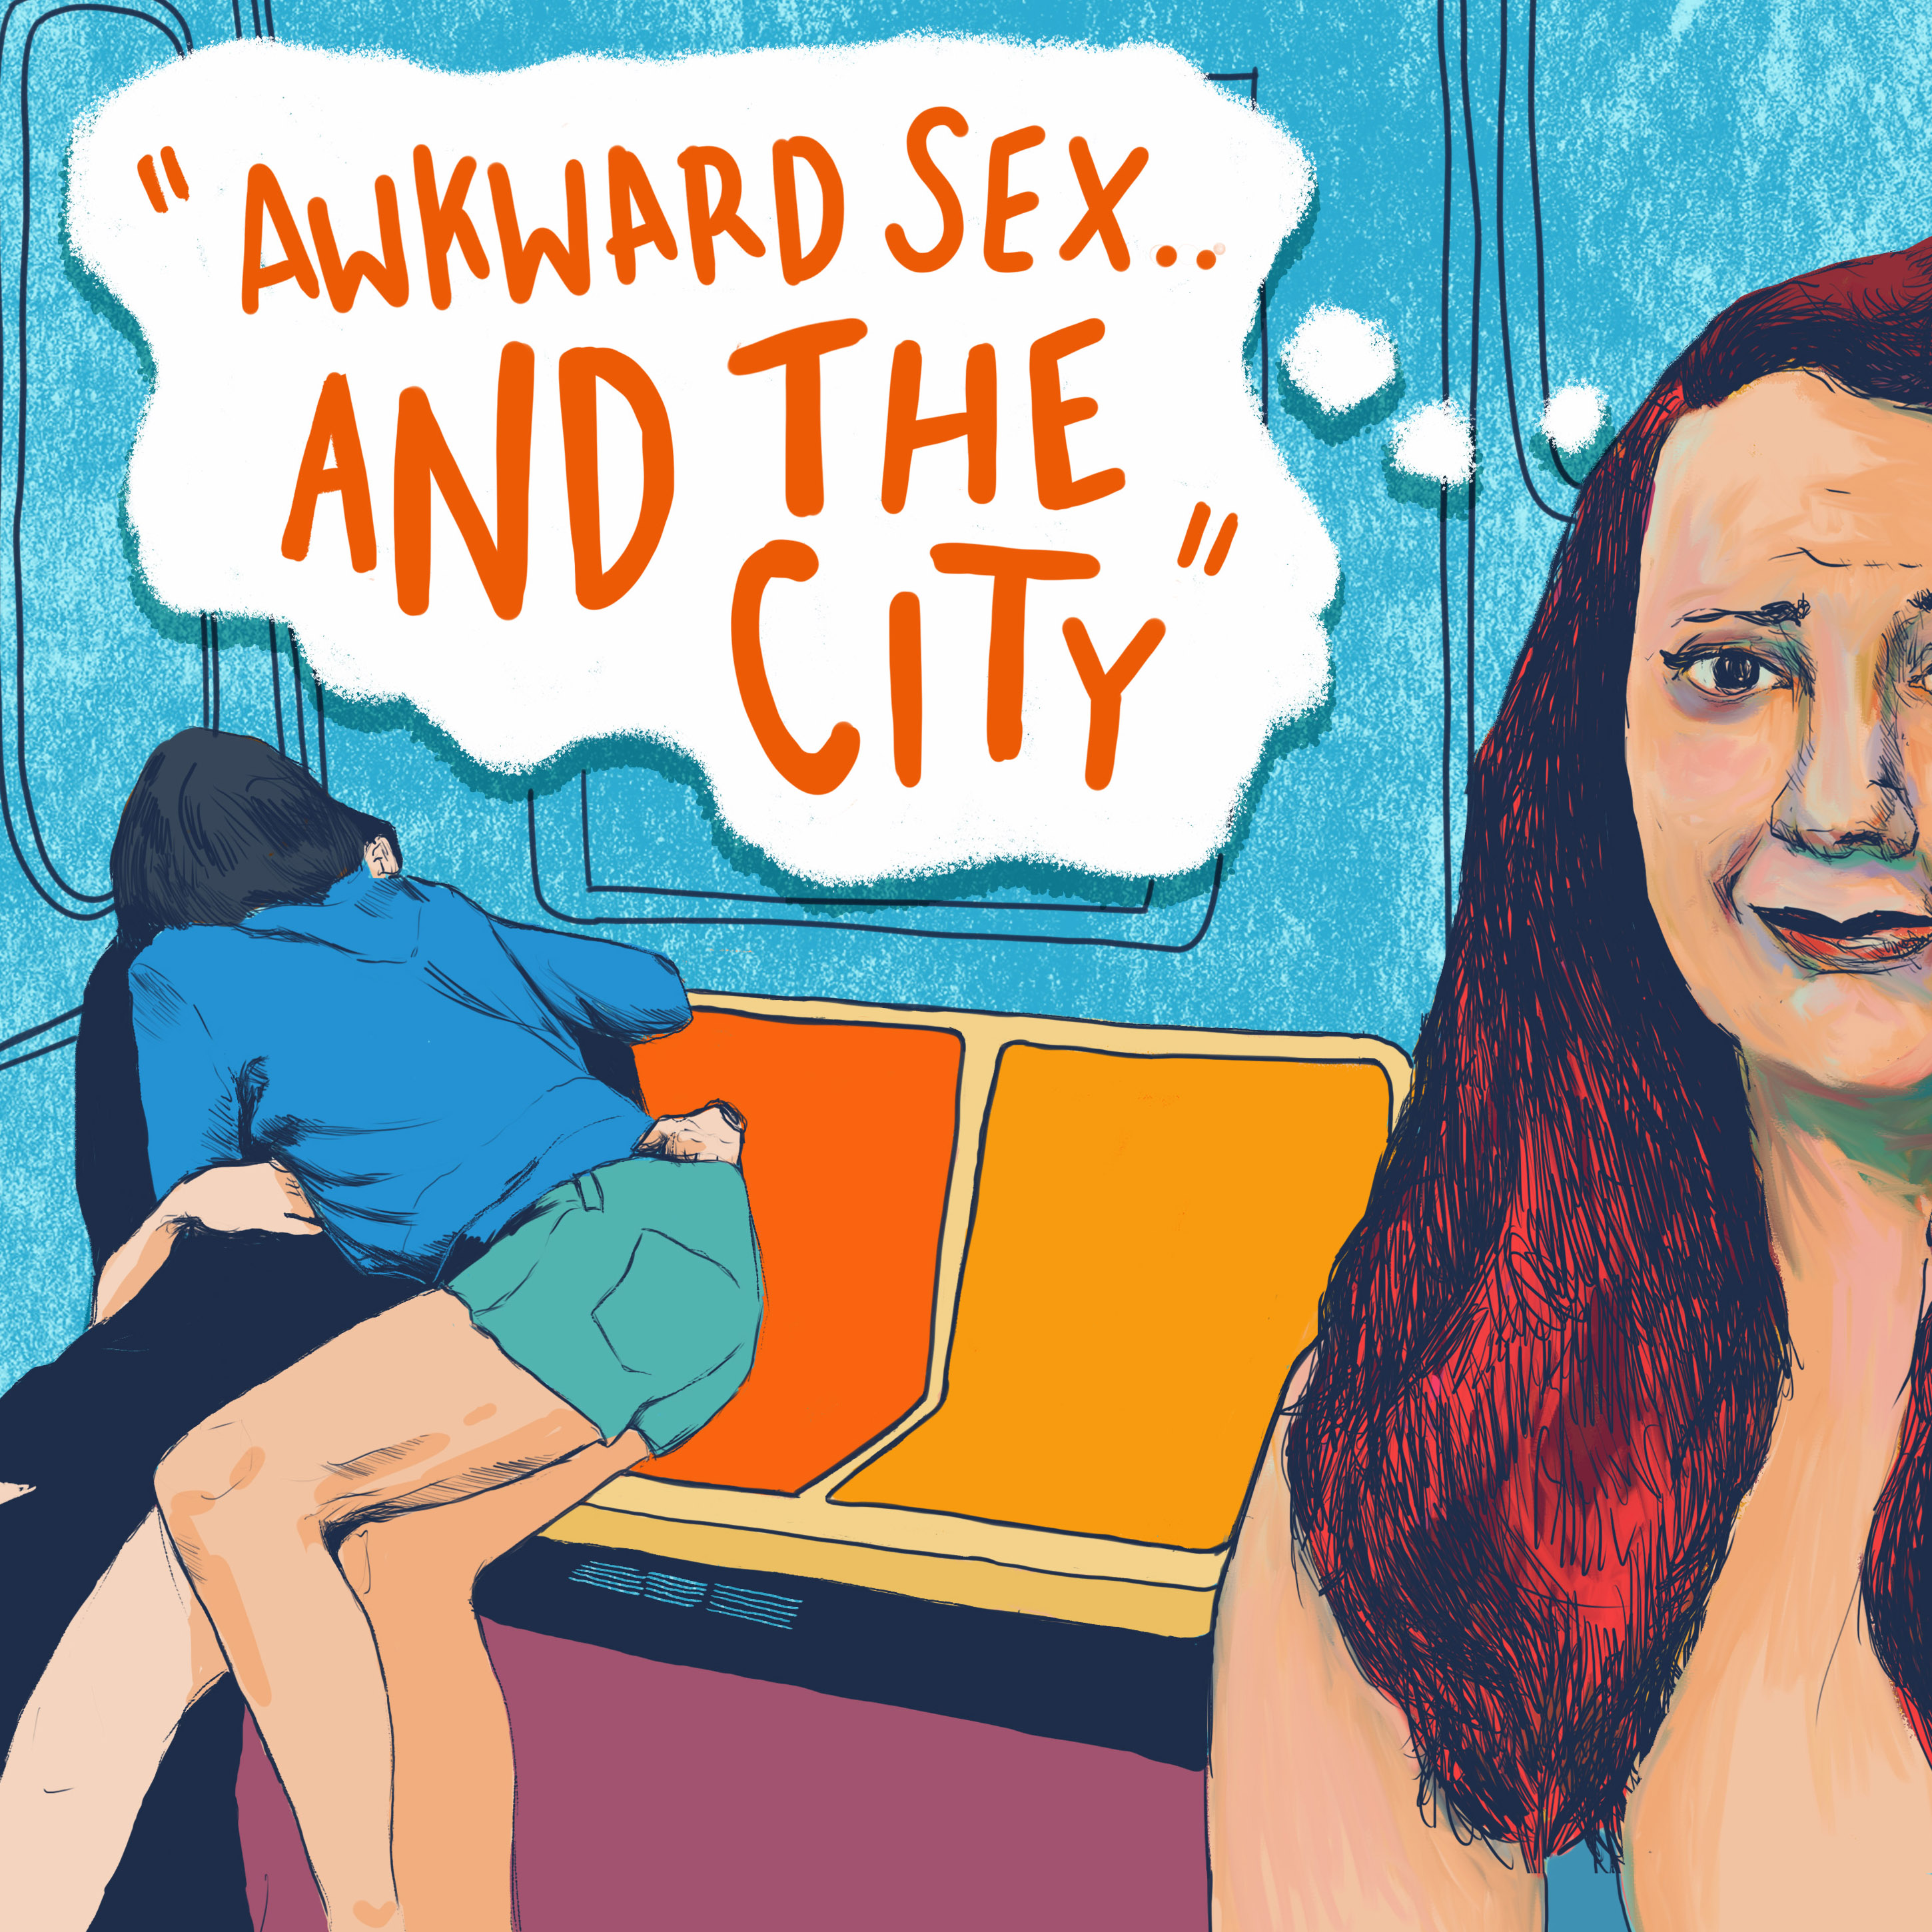 Awkward Sex And The City with Natalie Wall photo